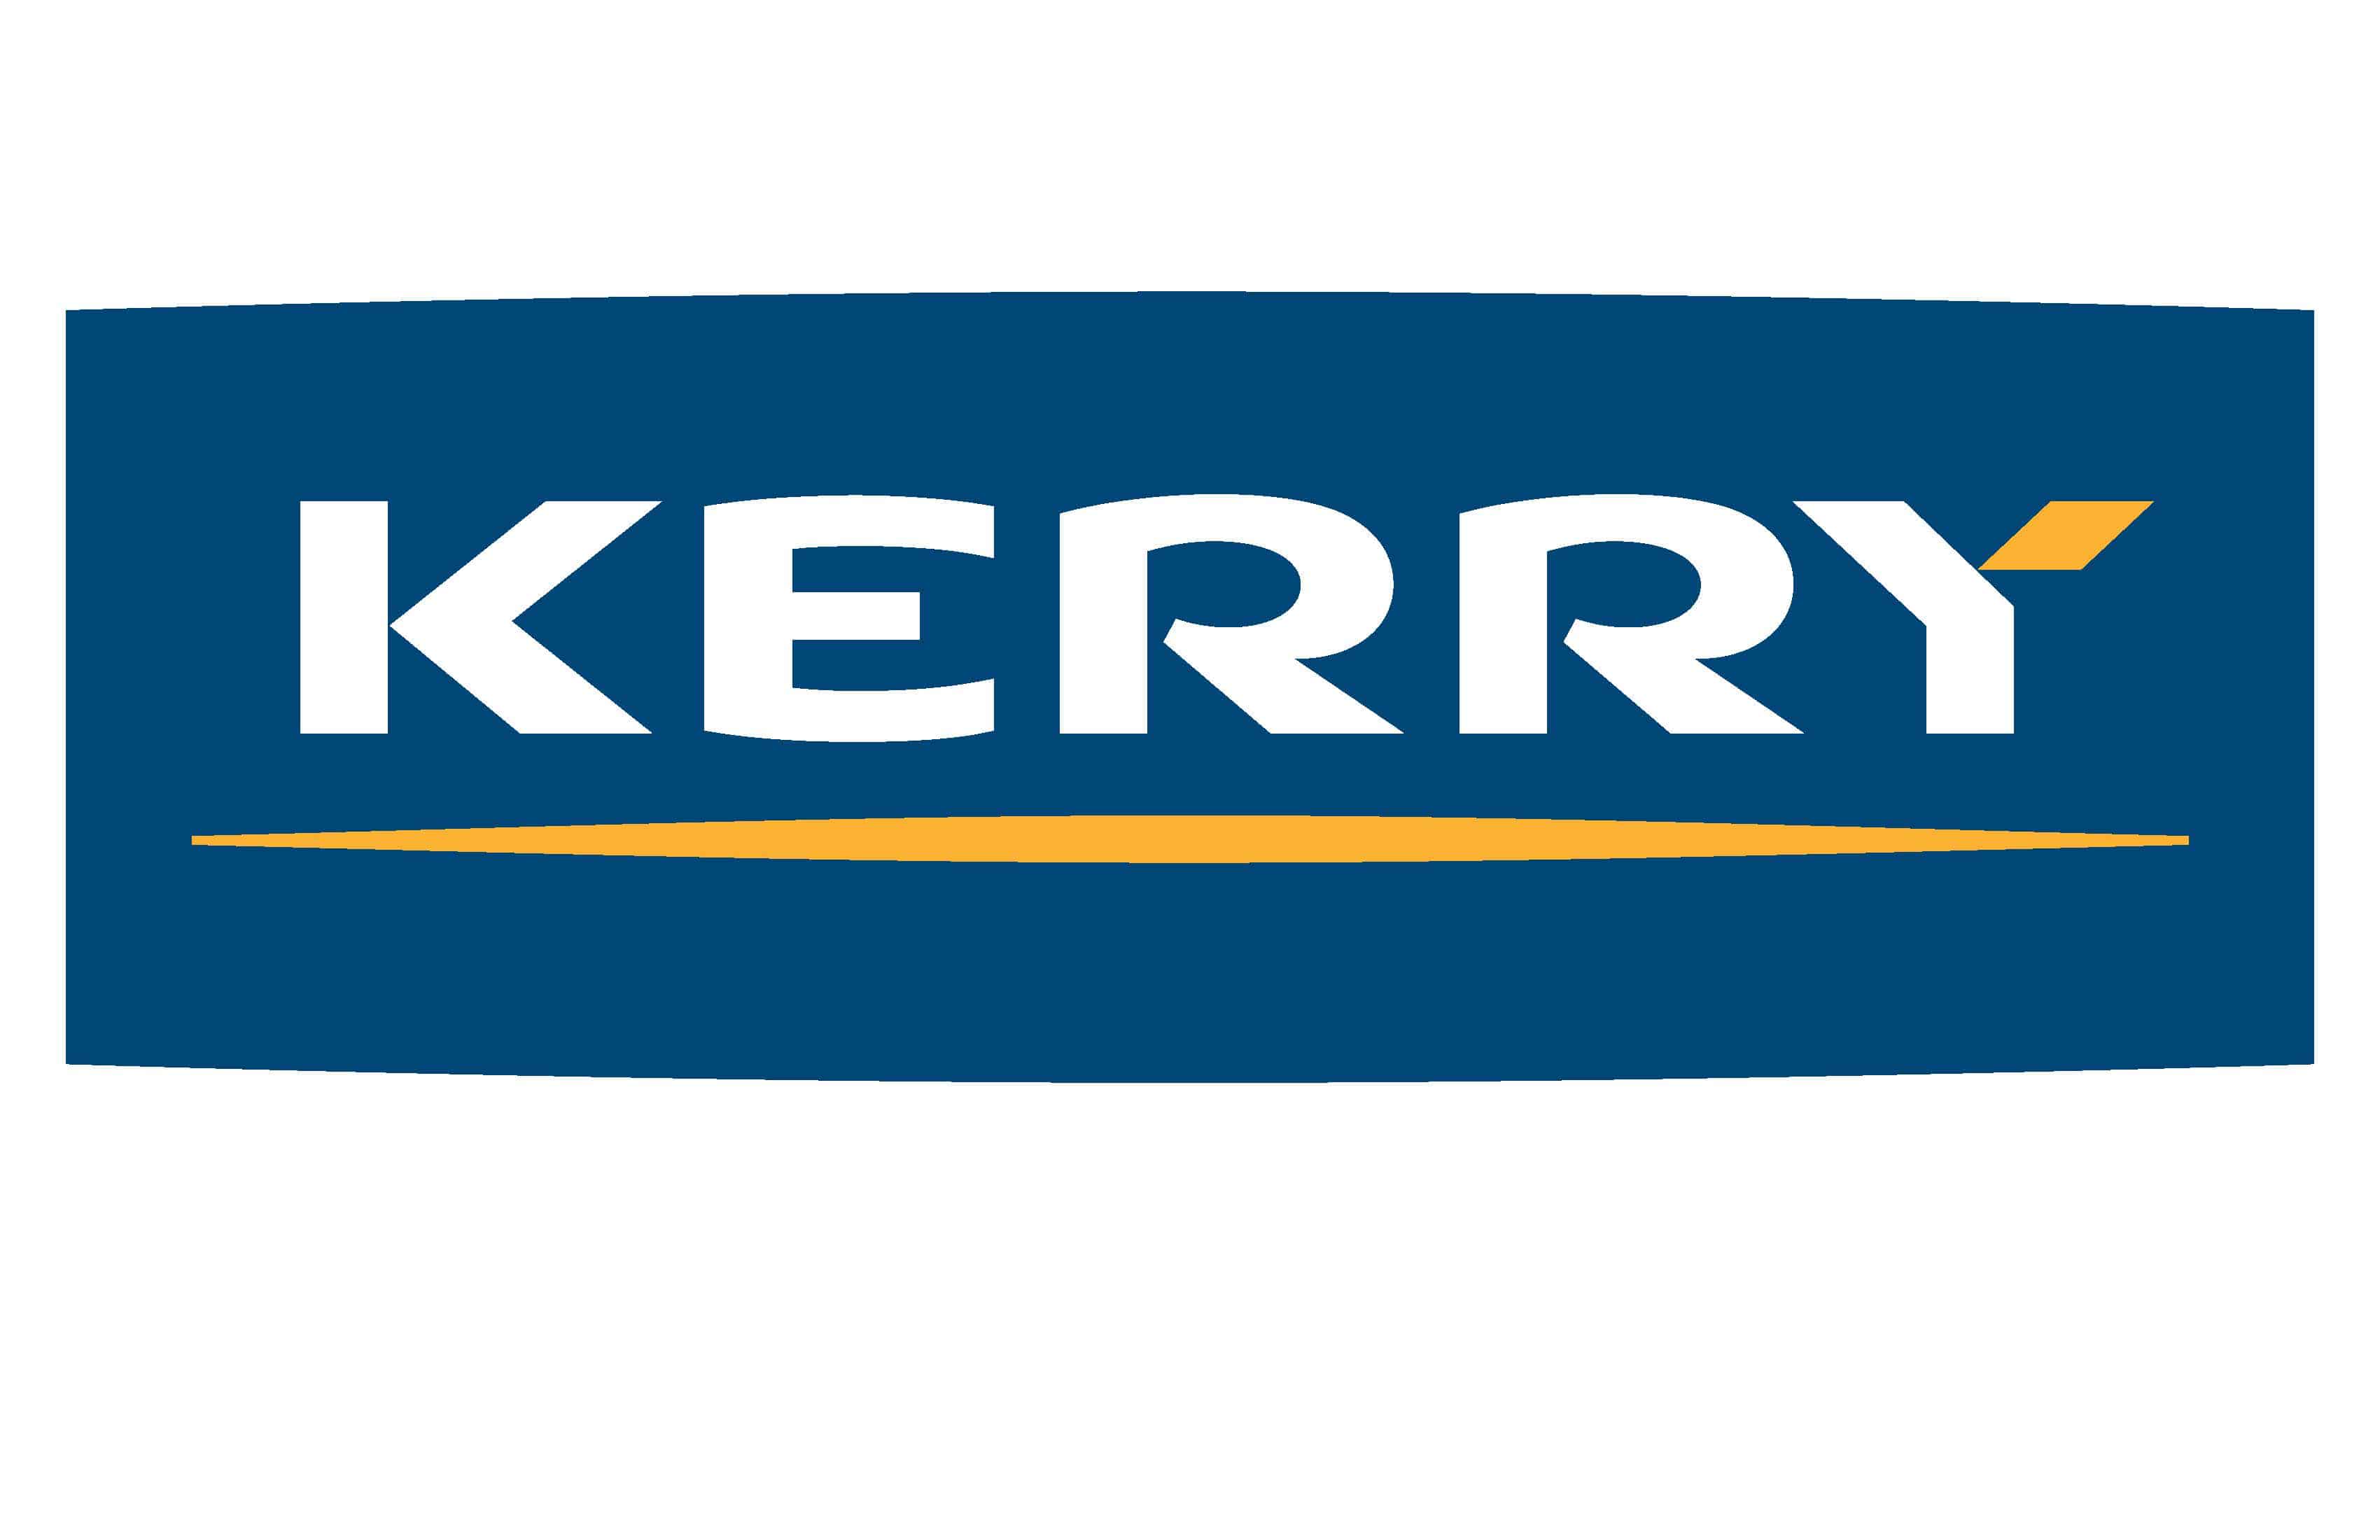 Keane: Kerry a sideshow with Dublin focus - RTE